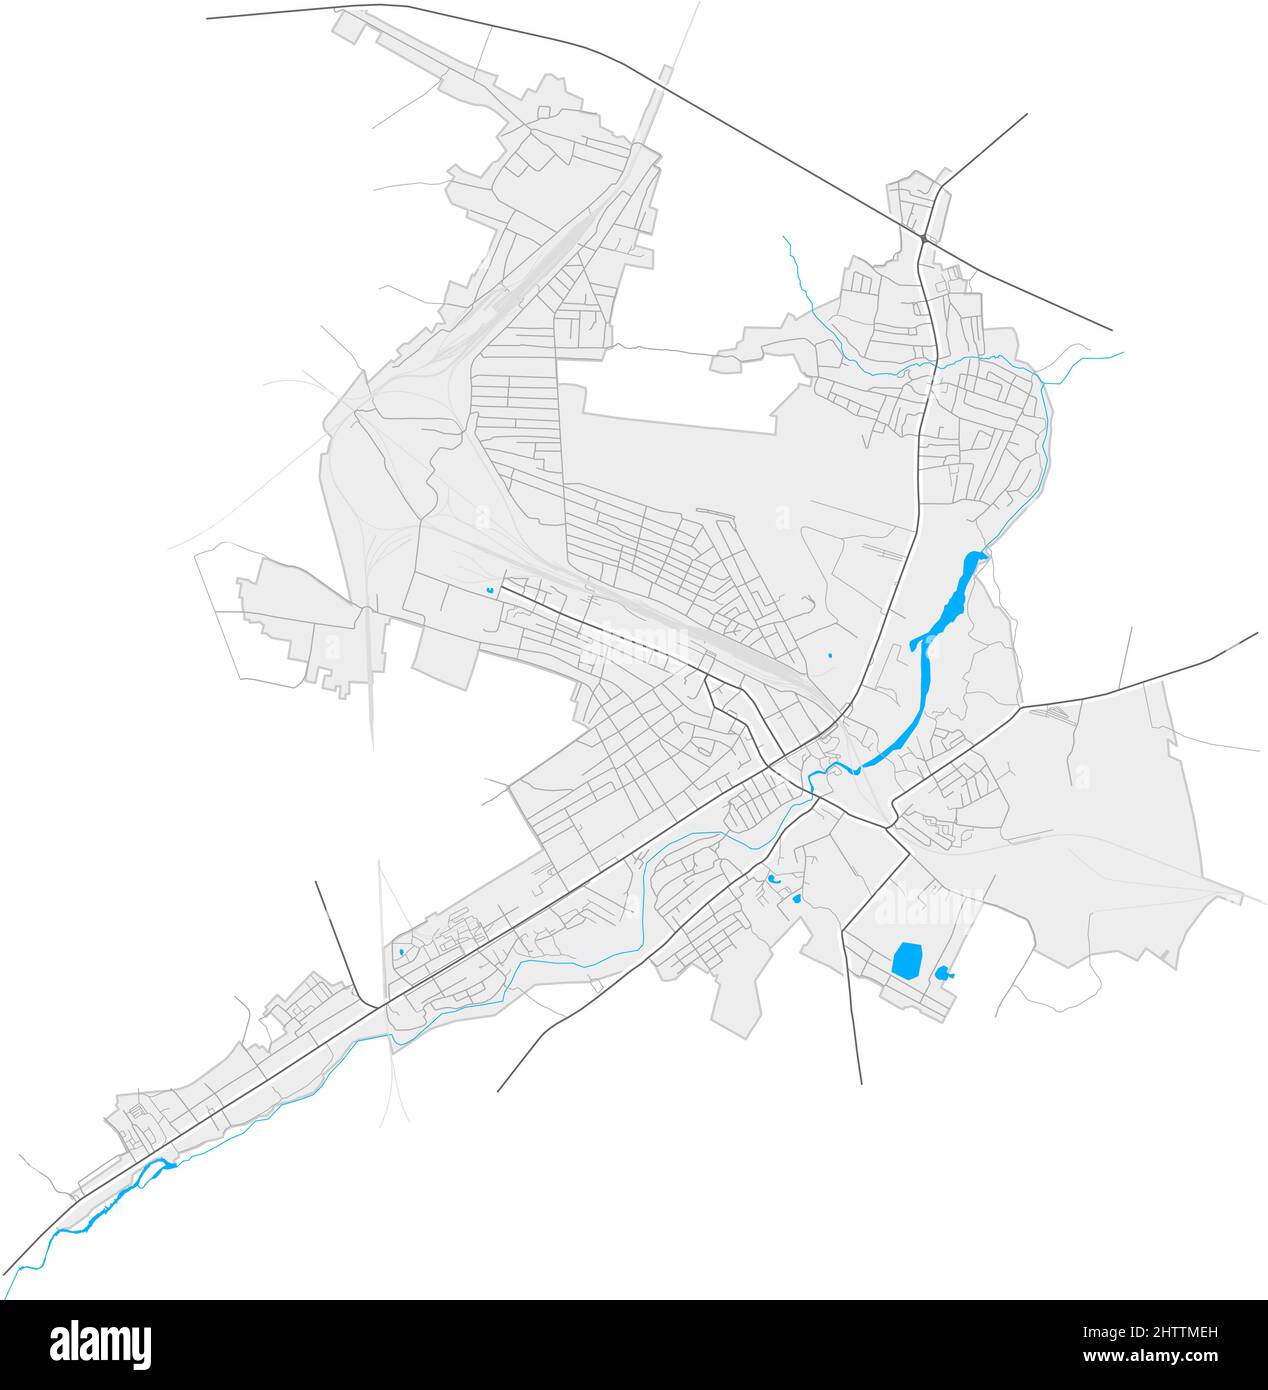 Korosten, Zhytomyr Oblast, Ukraine high resolution vector map with city boundaries and outlined paths. White additional outlines for main roads. Many Stock Vector